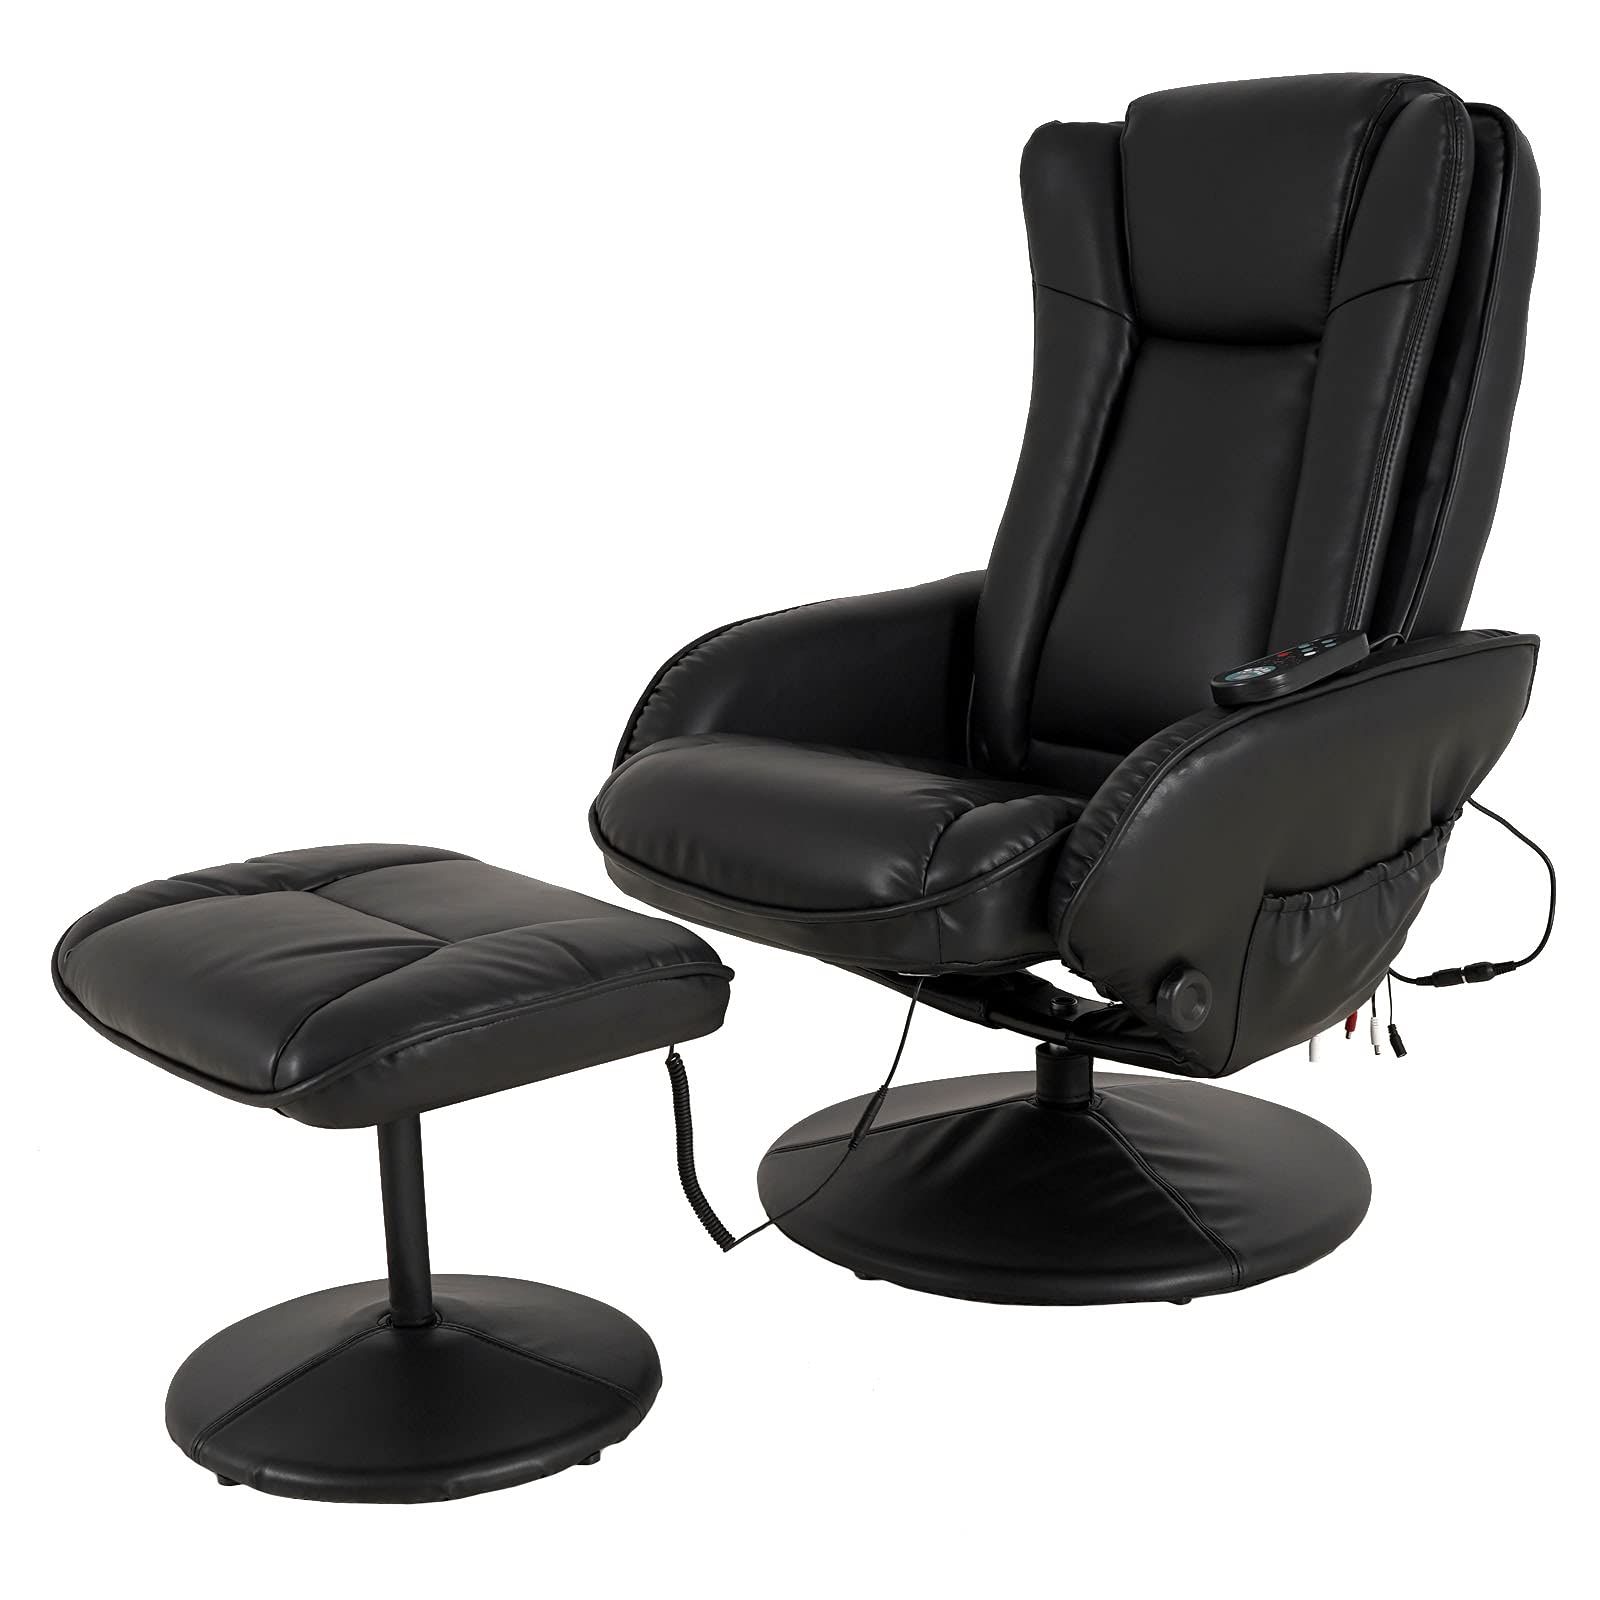 Current Black Leather Wrapped Ottomans Regarding Amazon: Jc Home Drammen Massaging Leather Recliner And Ottoman With  Leather Wrapped Base, Black : Home & Kitchen (View 5 of 10)